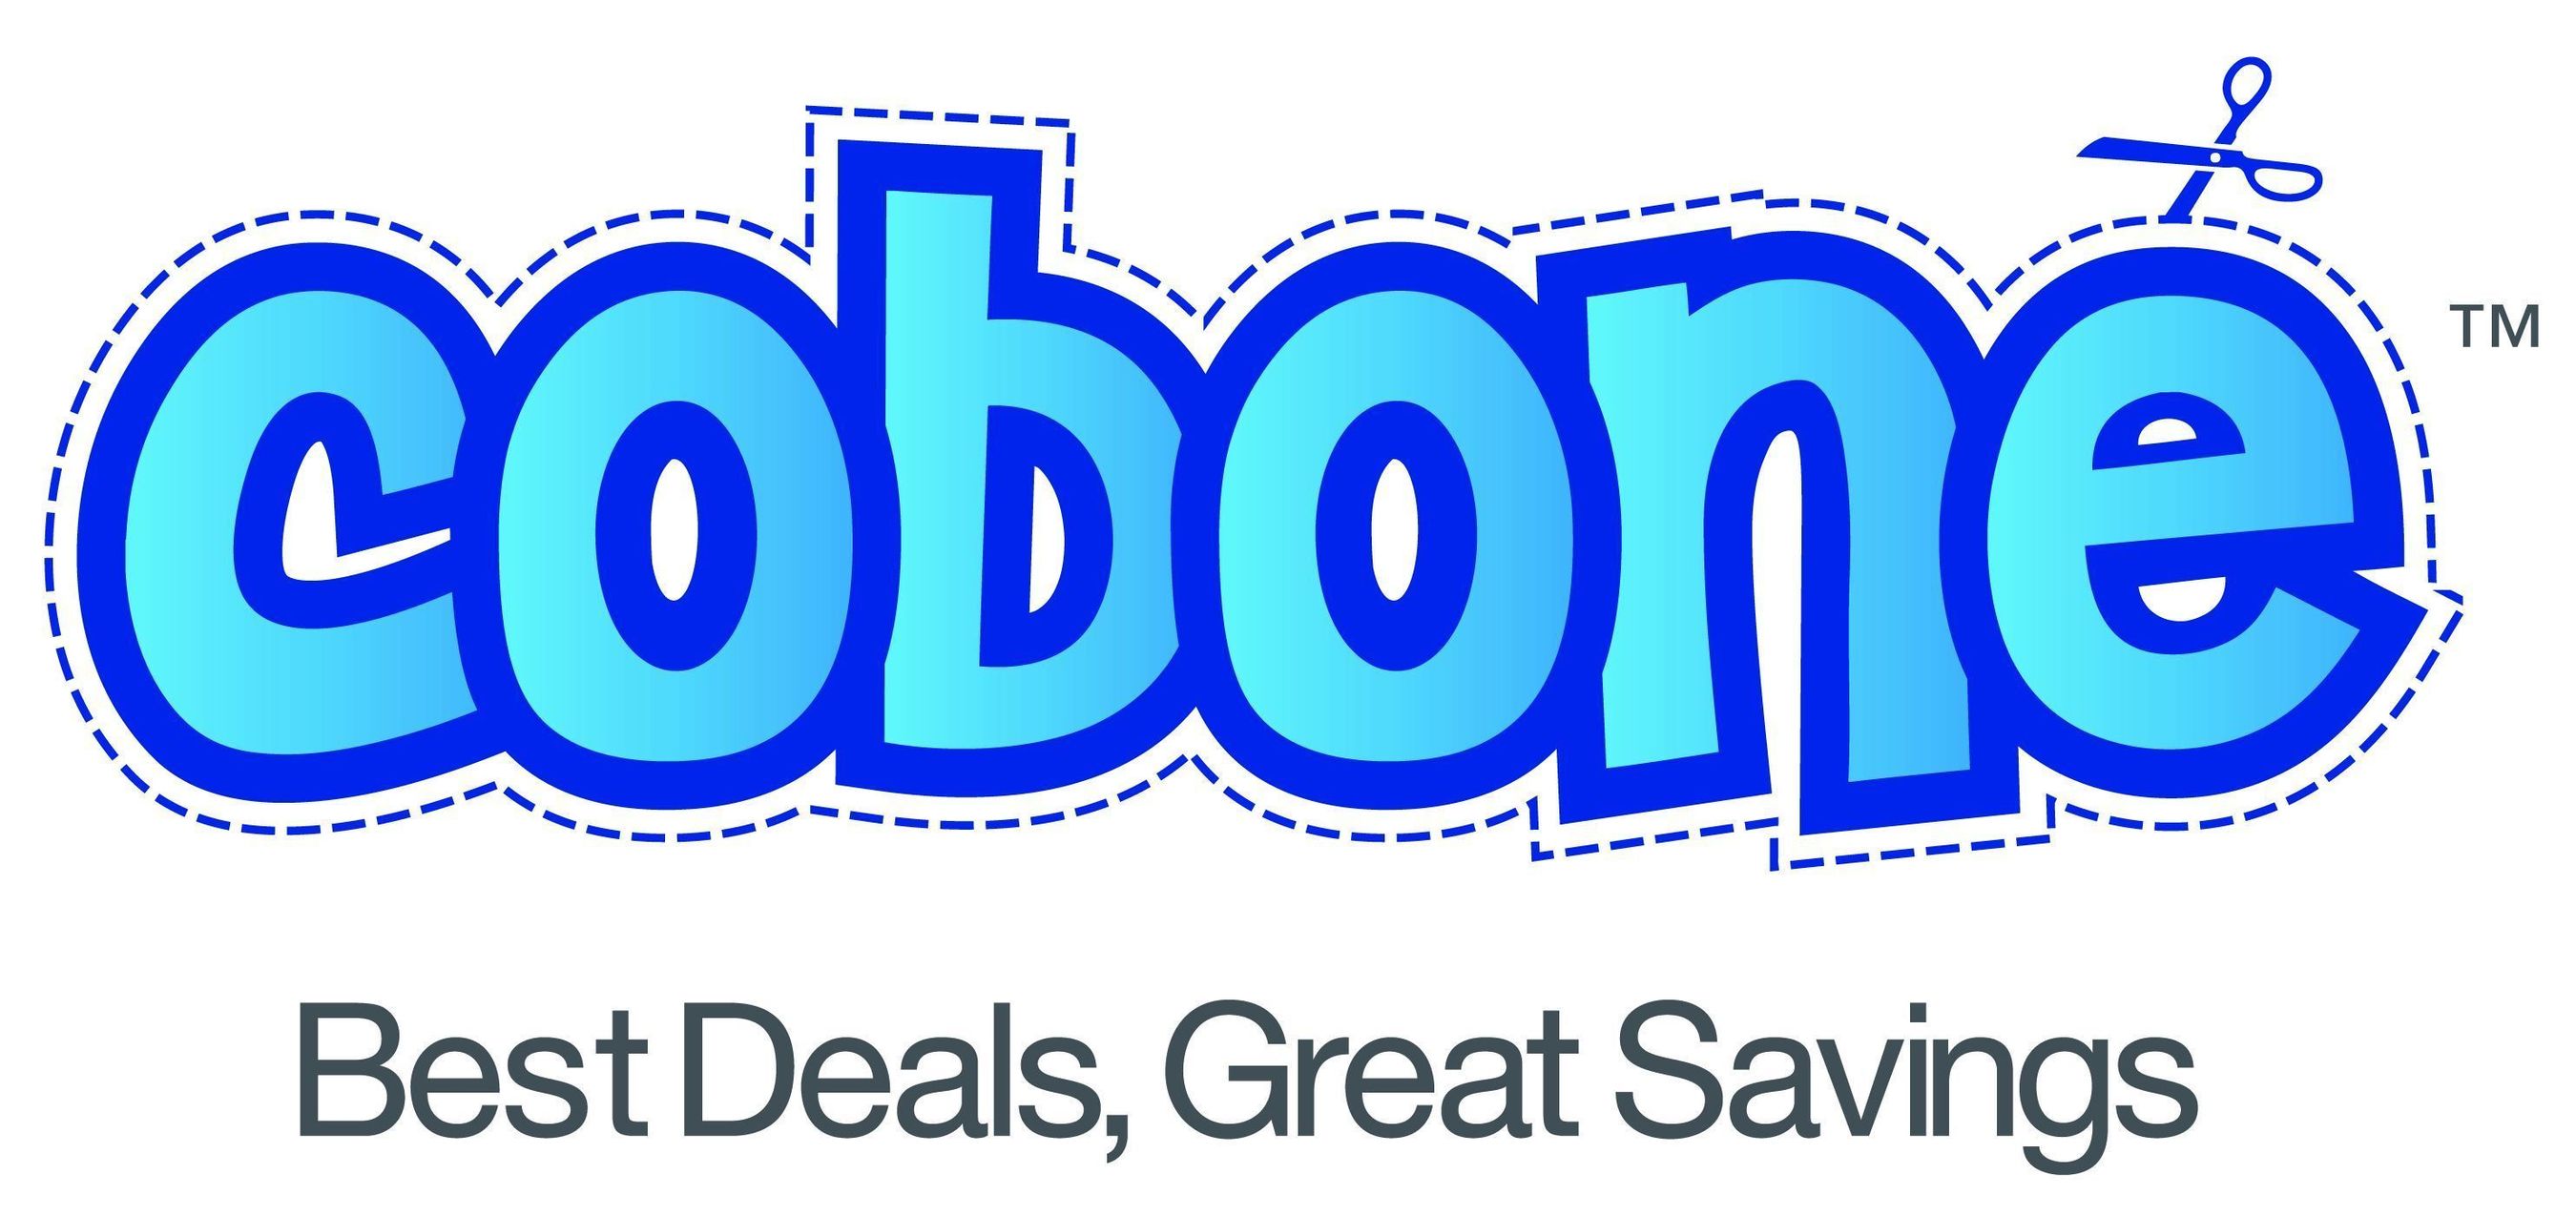 Leading Middle Eastern Daily Deal Site Cobone.com Acquired by Tiger Global